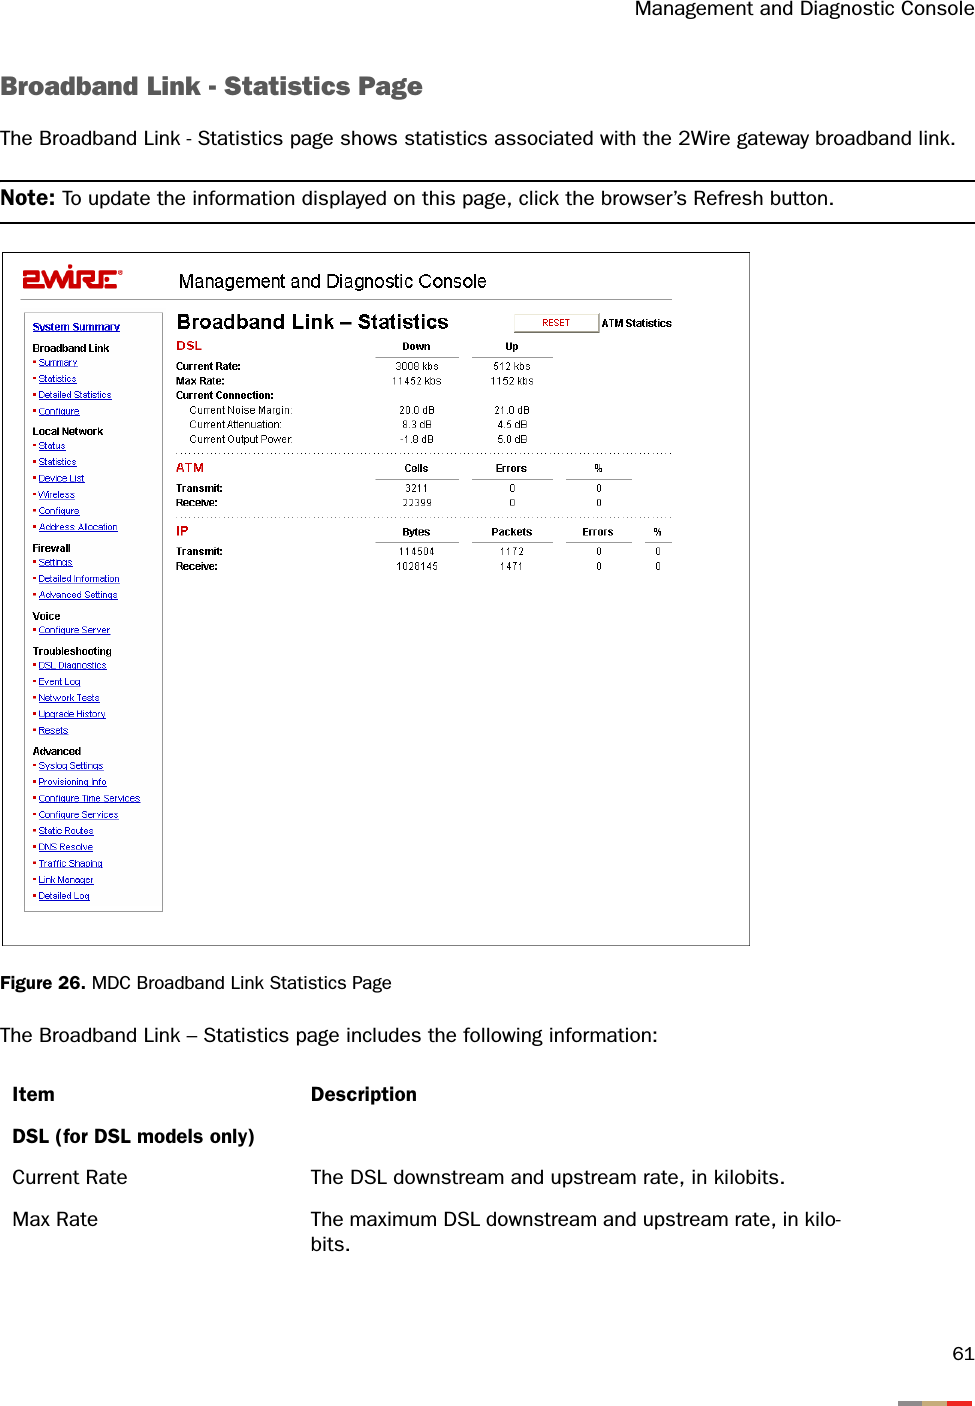 Management and Diagnostic Console61Broadband Link - Statistics PageThe Broadband Link - Statistics page shows statistics associated with the 2Wire gateway broadband link.Note: To update the information displayed on this page, click the browser’s Refresh button.Figure 26. MDC Broadband Link Statistics PageThe Broadband Link – Statistics page includes the following information:Item DescriptionDSL (for DSL models only)Current Rate The DSL downstream and upstream rate, in kilobits.Max Rate The maximum DSL downstream and upstream rate, in kilo-bits.